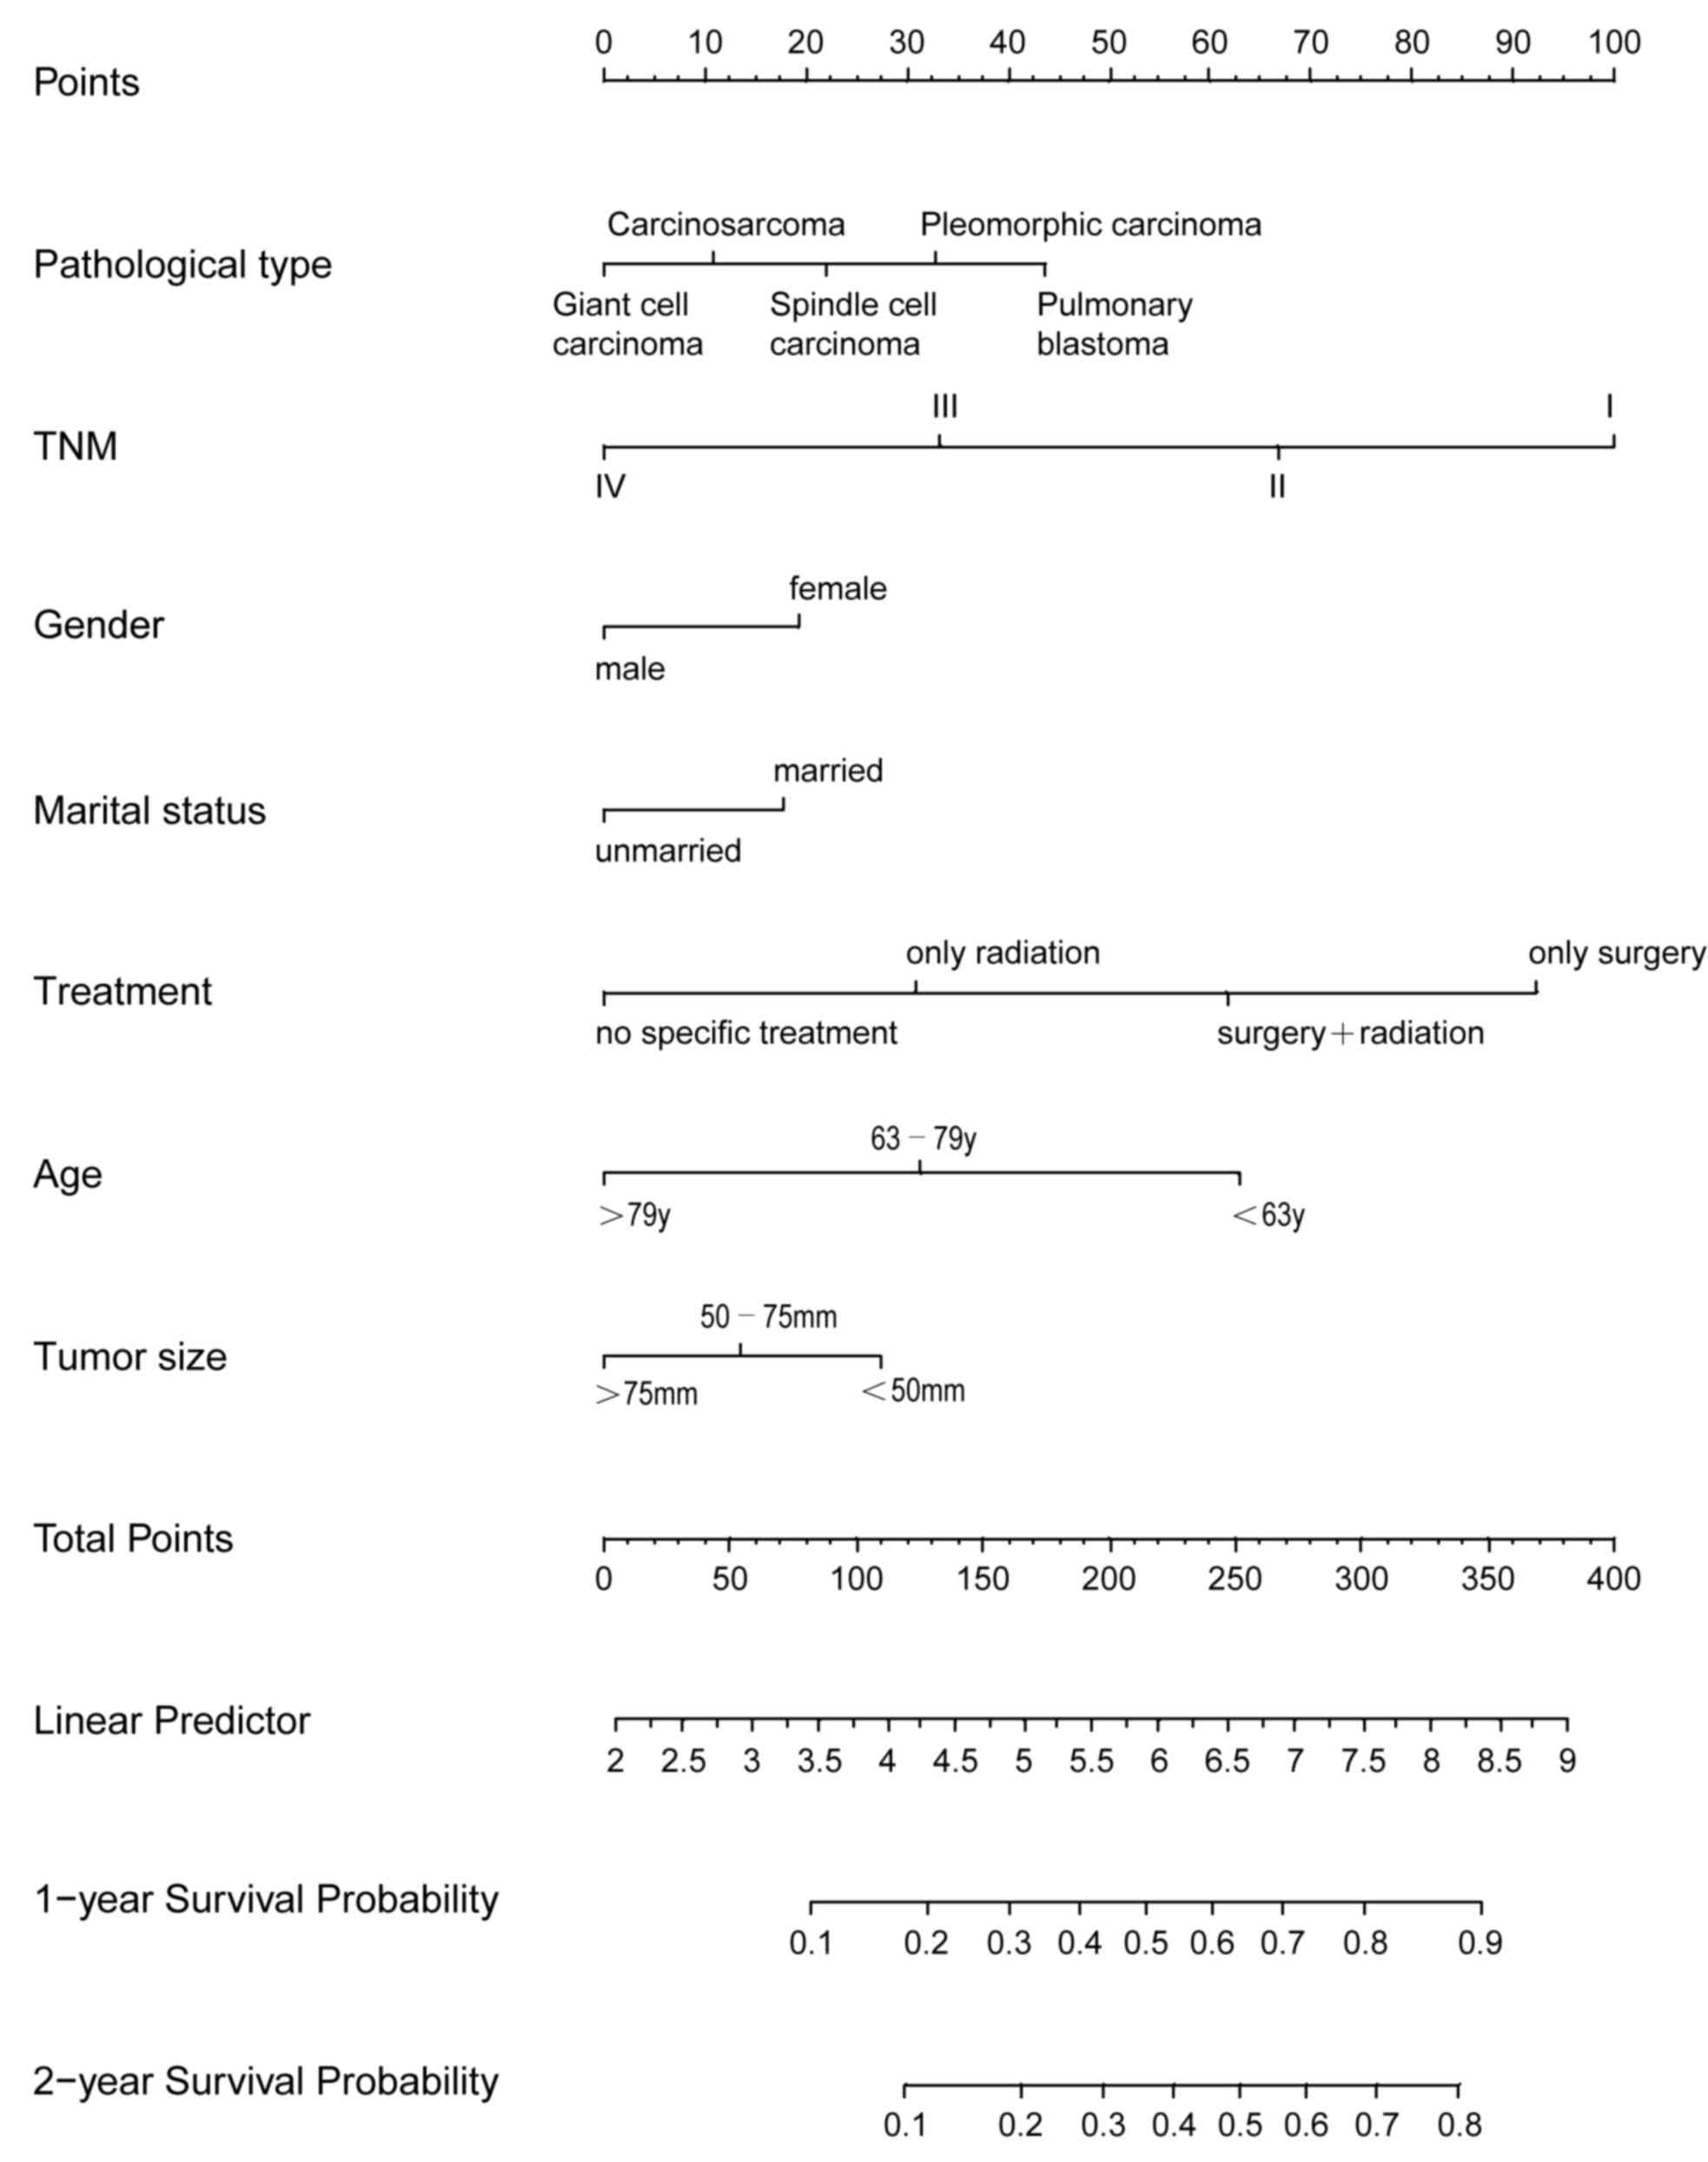 Clinical Pathological And Treatment Factors Associated With The Survival Of Patients With Pulmonary Sarcomatoid Carcinoma